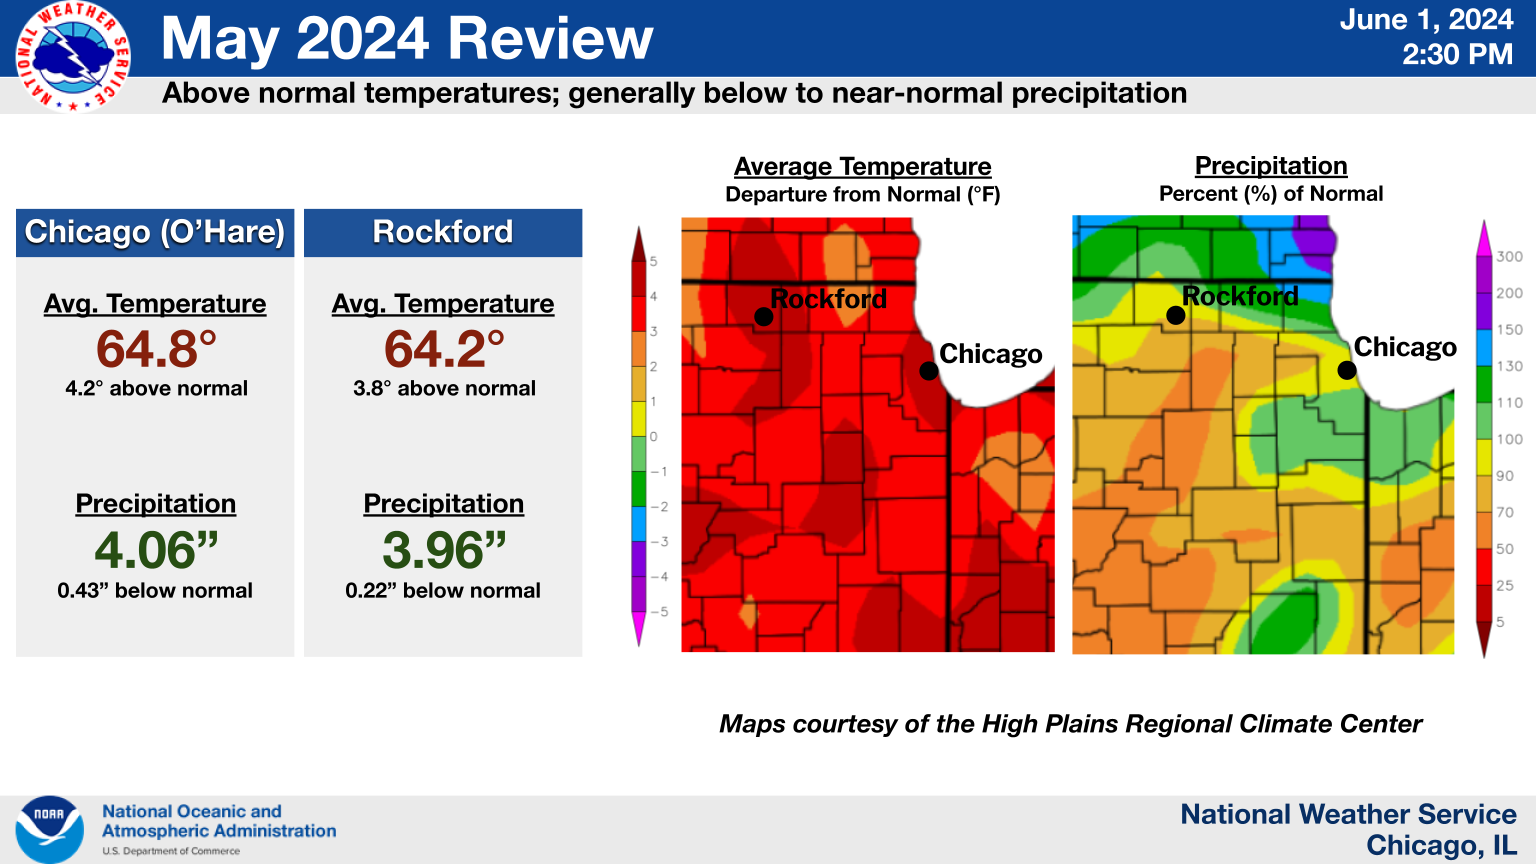 Headline: May 2024 Review. Sub-Headline: Above normal temperatures; generally below to near-normal precipitation. Chicago (Oâ€™Hare): Average Temperature: 64.8 degrees; 4.2 degrees above normal. Precipitation: 4.06 inches; 0.43 inches below normal. Rockford: Average Temperature: 64.2 degrees; 3.8 degrees above normal. Precipitation: 3.96 inches; 0.22 inches below normal. Graphic Created: Saturday, June 1, 2024 2:30 PM CDT